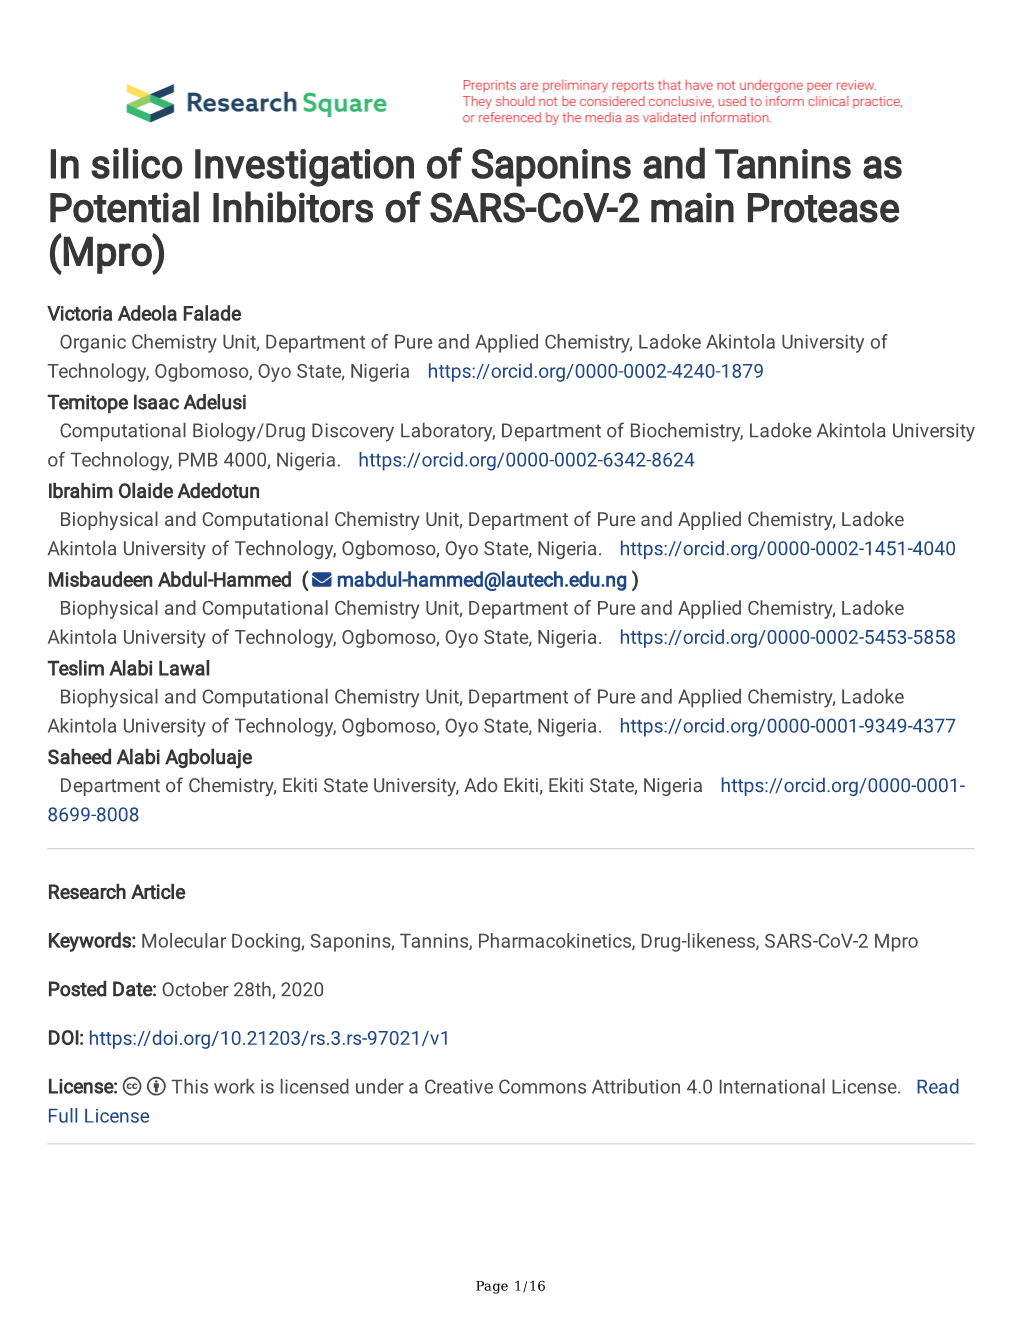 In Silico Investigation of Saponins and Tannins As Potential Inhibitors of SARS-Cov-2 Main Protease (Mpro)